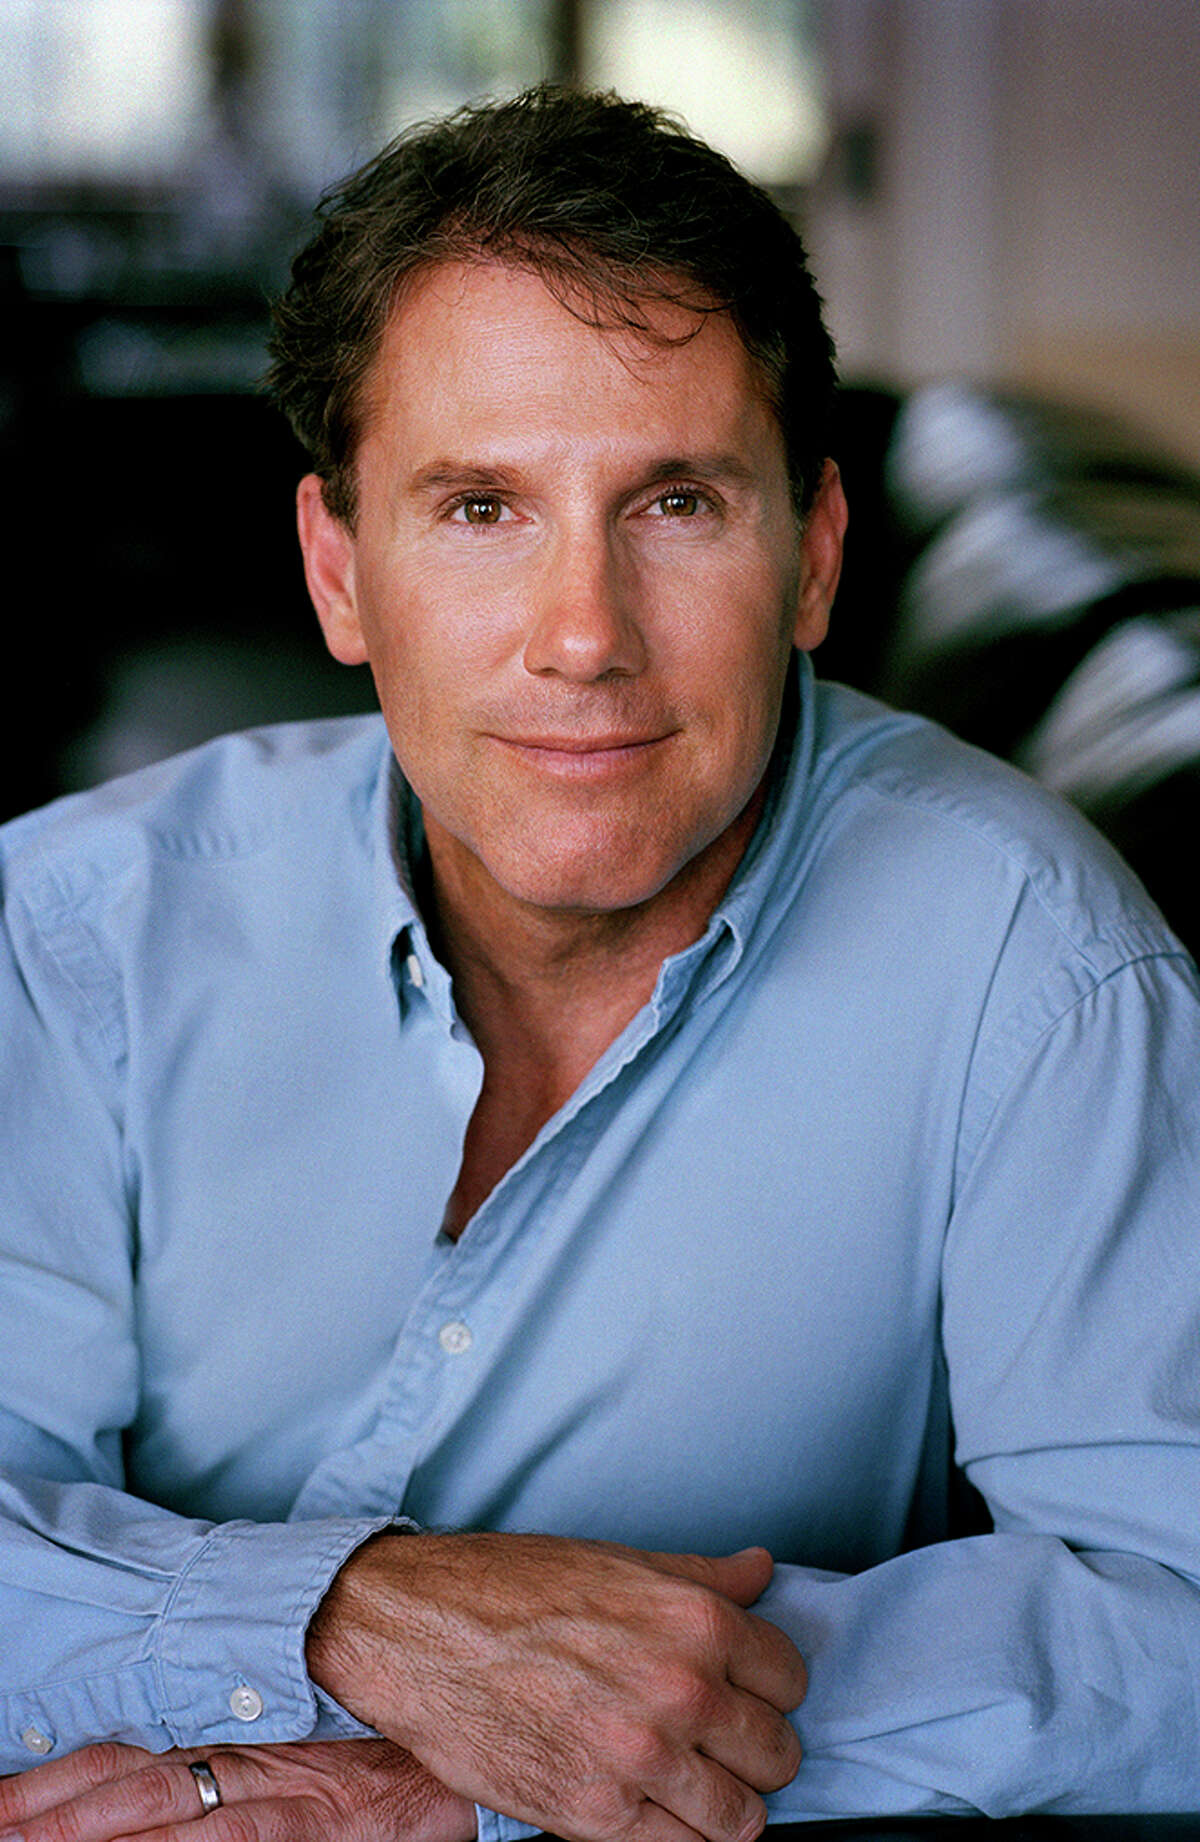 Author Nicholas Sparks will speak at Sacred Heart University on Monday, March 11, as part of the Student Affairs Lecture Series. His book, "Safe Haven" was made into a movie, which came out on Valentine's Day.